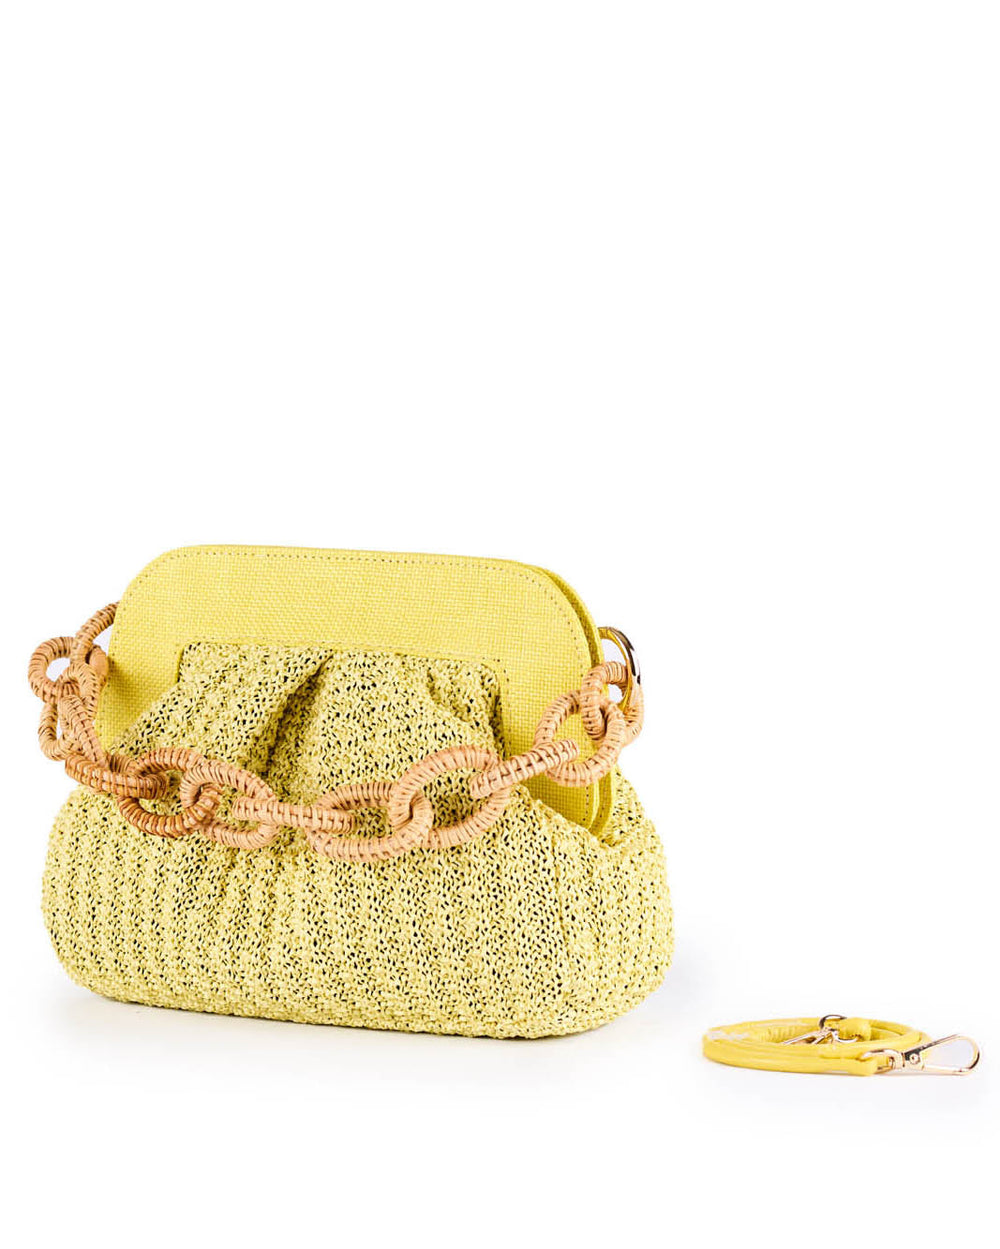 Yellow knitted handbag with a braided shoulder strap and matching keychain